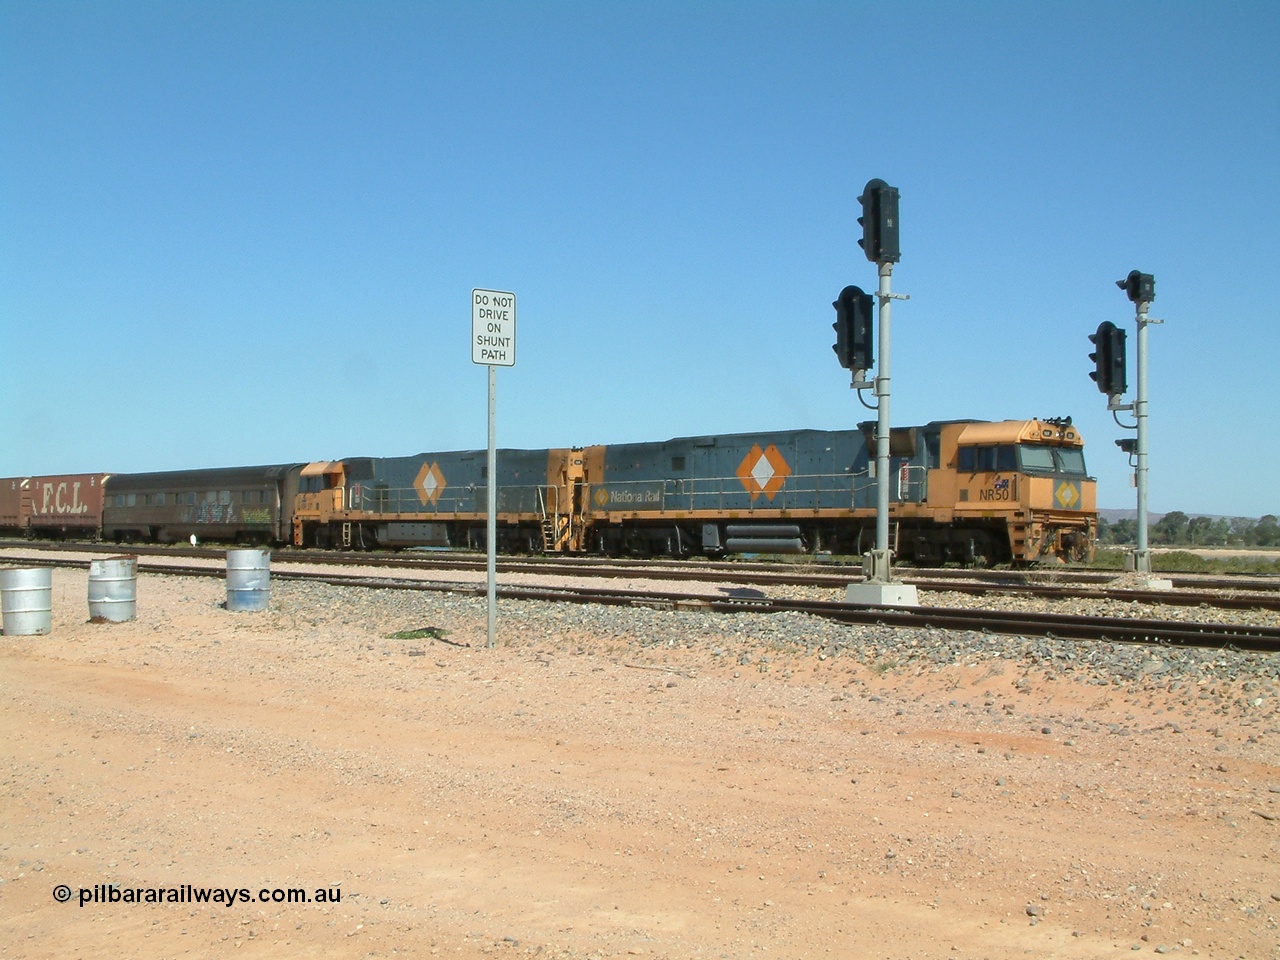 030404 125029
Port Augusta Spencer Junction yard, a Perth bound intermodal awaits departure time on 13 Road behind National Rail NR class units built by Goninan as GE Cv40-9i models, NR 50 serial 7250-08 / 97-252 and NR 37 serial 7250-06 / 97-239. 4th April 2003.
Keywords: NR-class;NR50;7250-08/97-252;Goninan;GE;Cv40-9i;